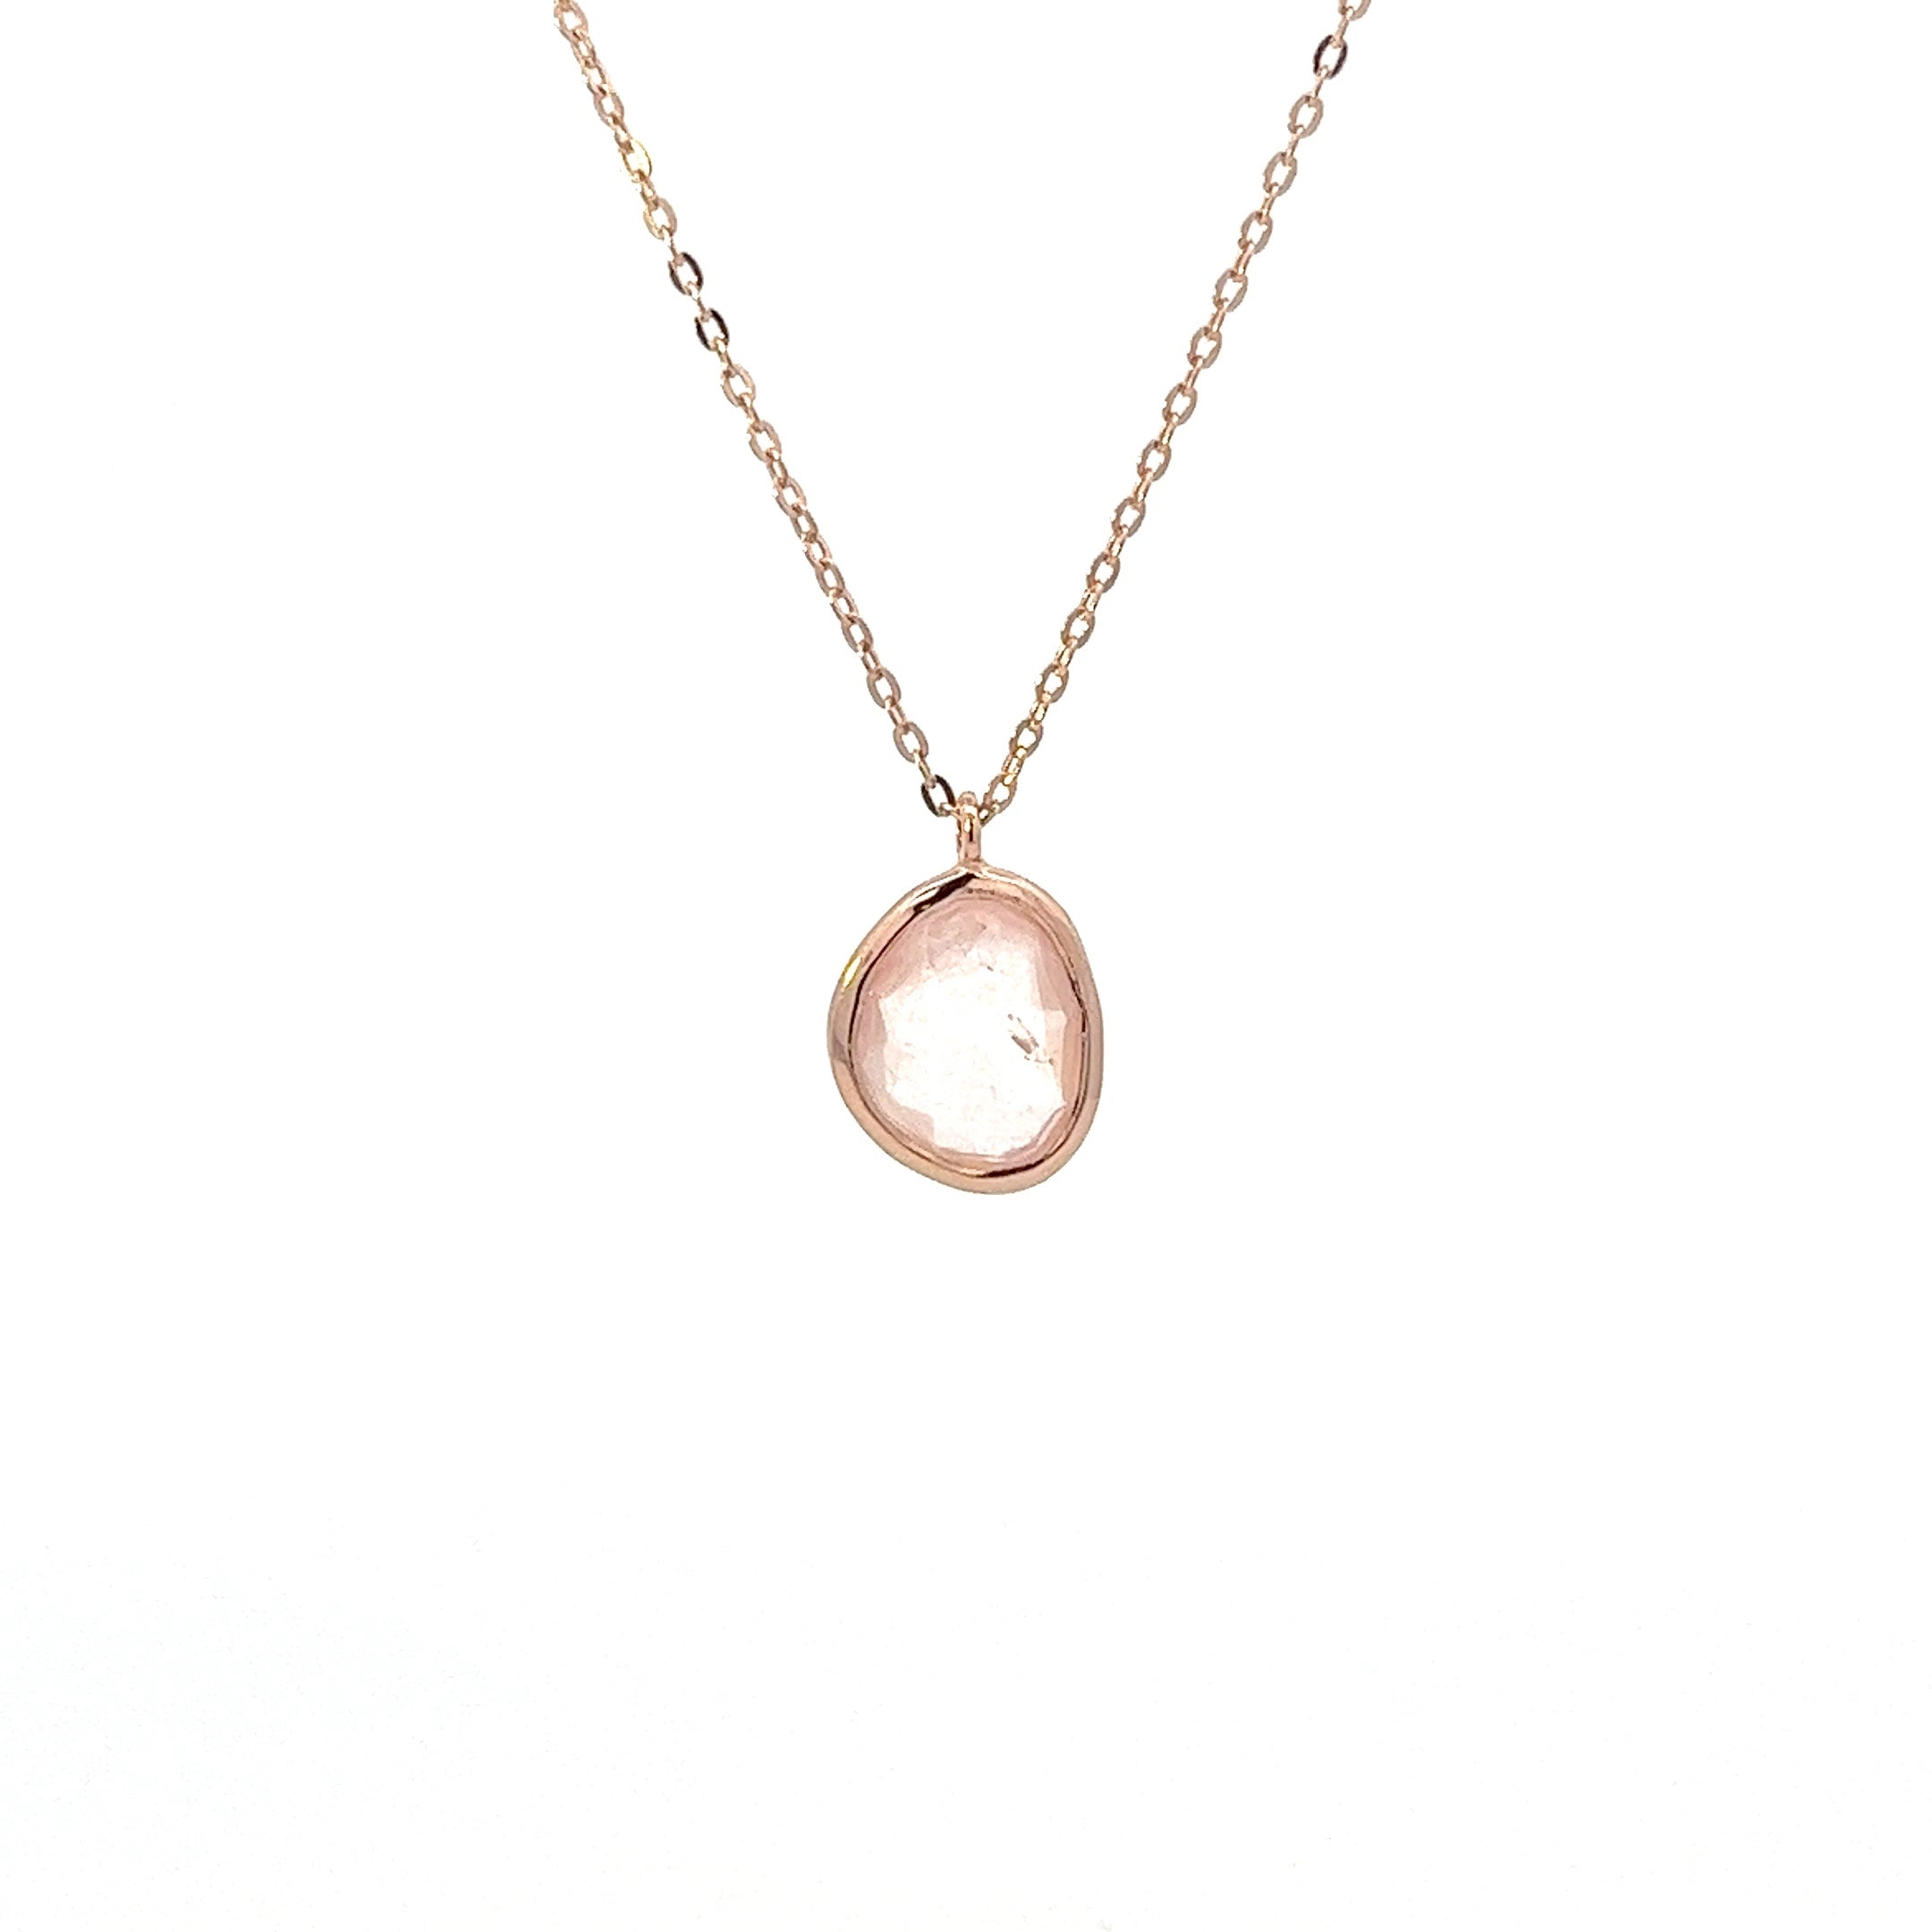 UNEVEN ROSE QUARTZ NECKLACE SET IN 925 SILVER ROSE GOLD PLATED